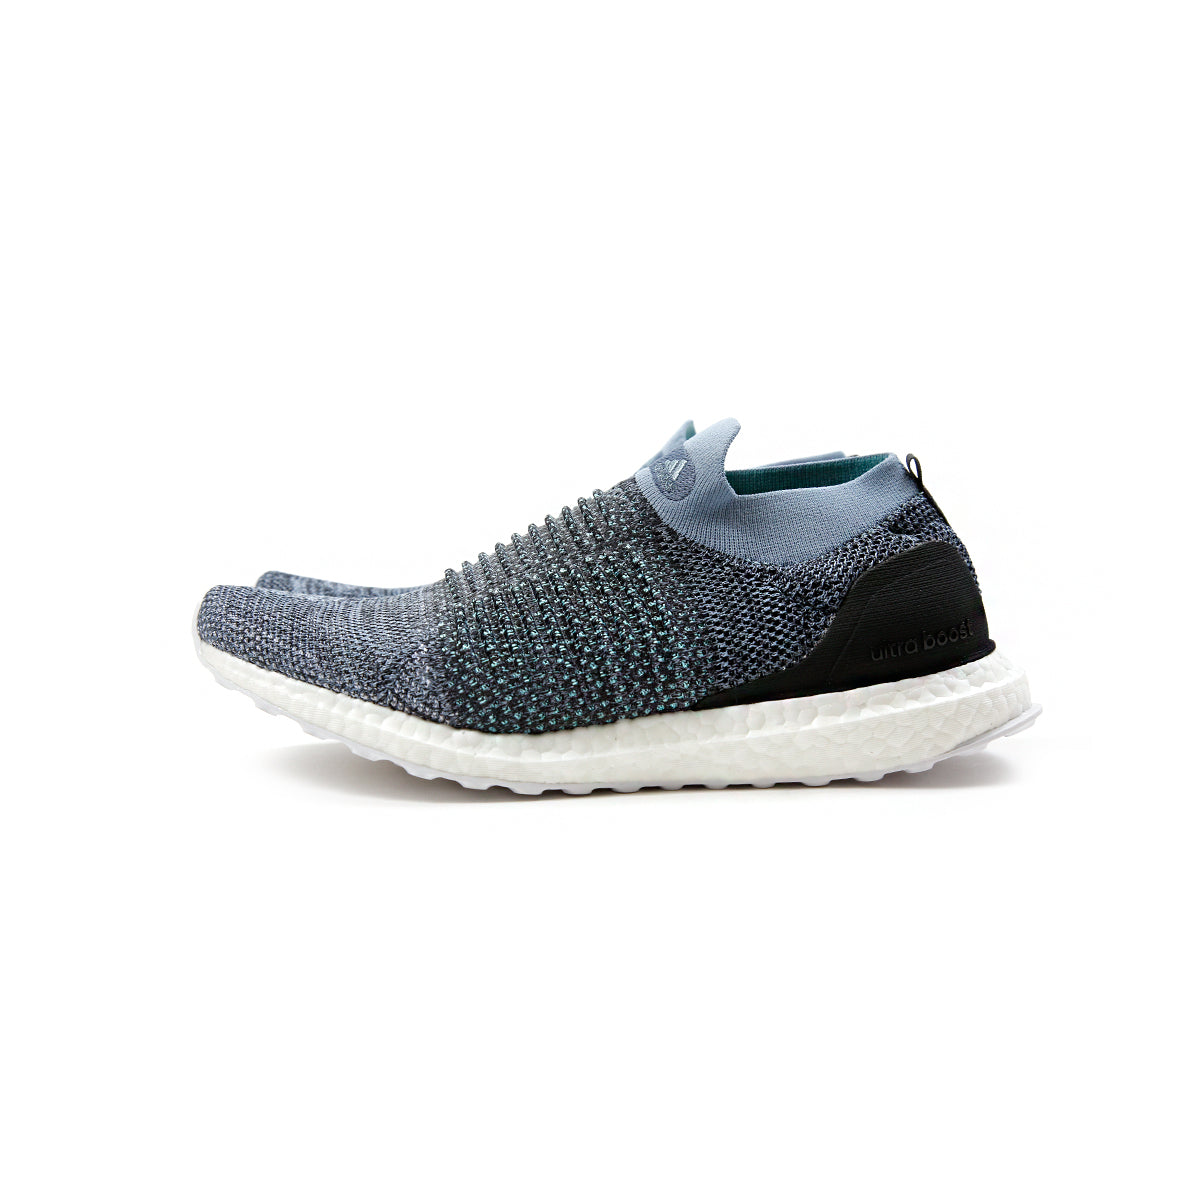 laceless parley